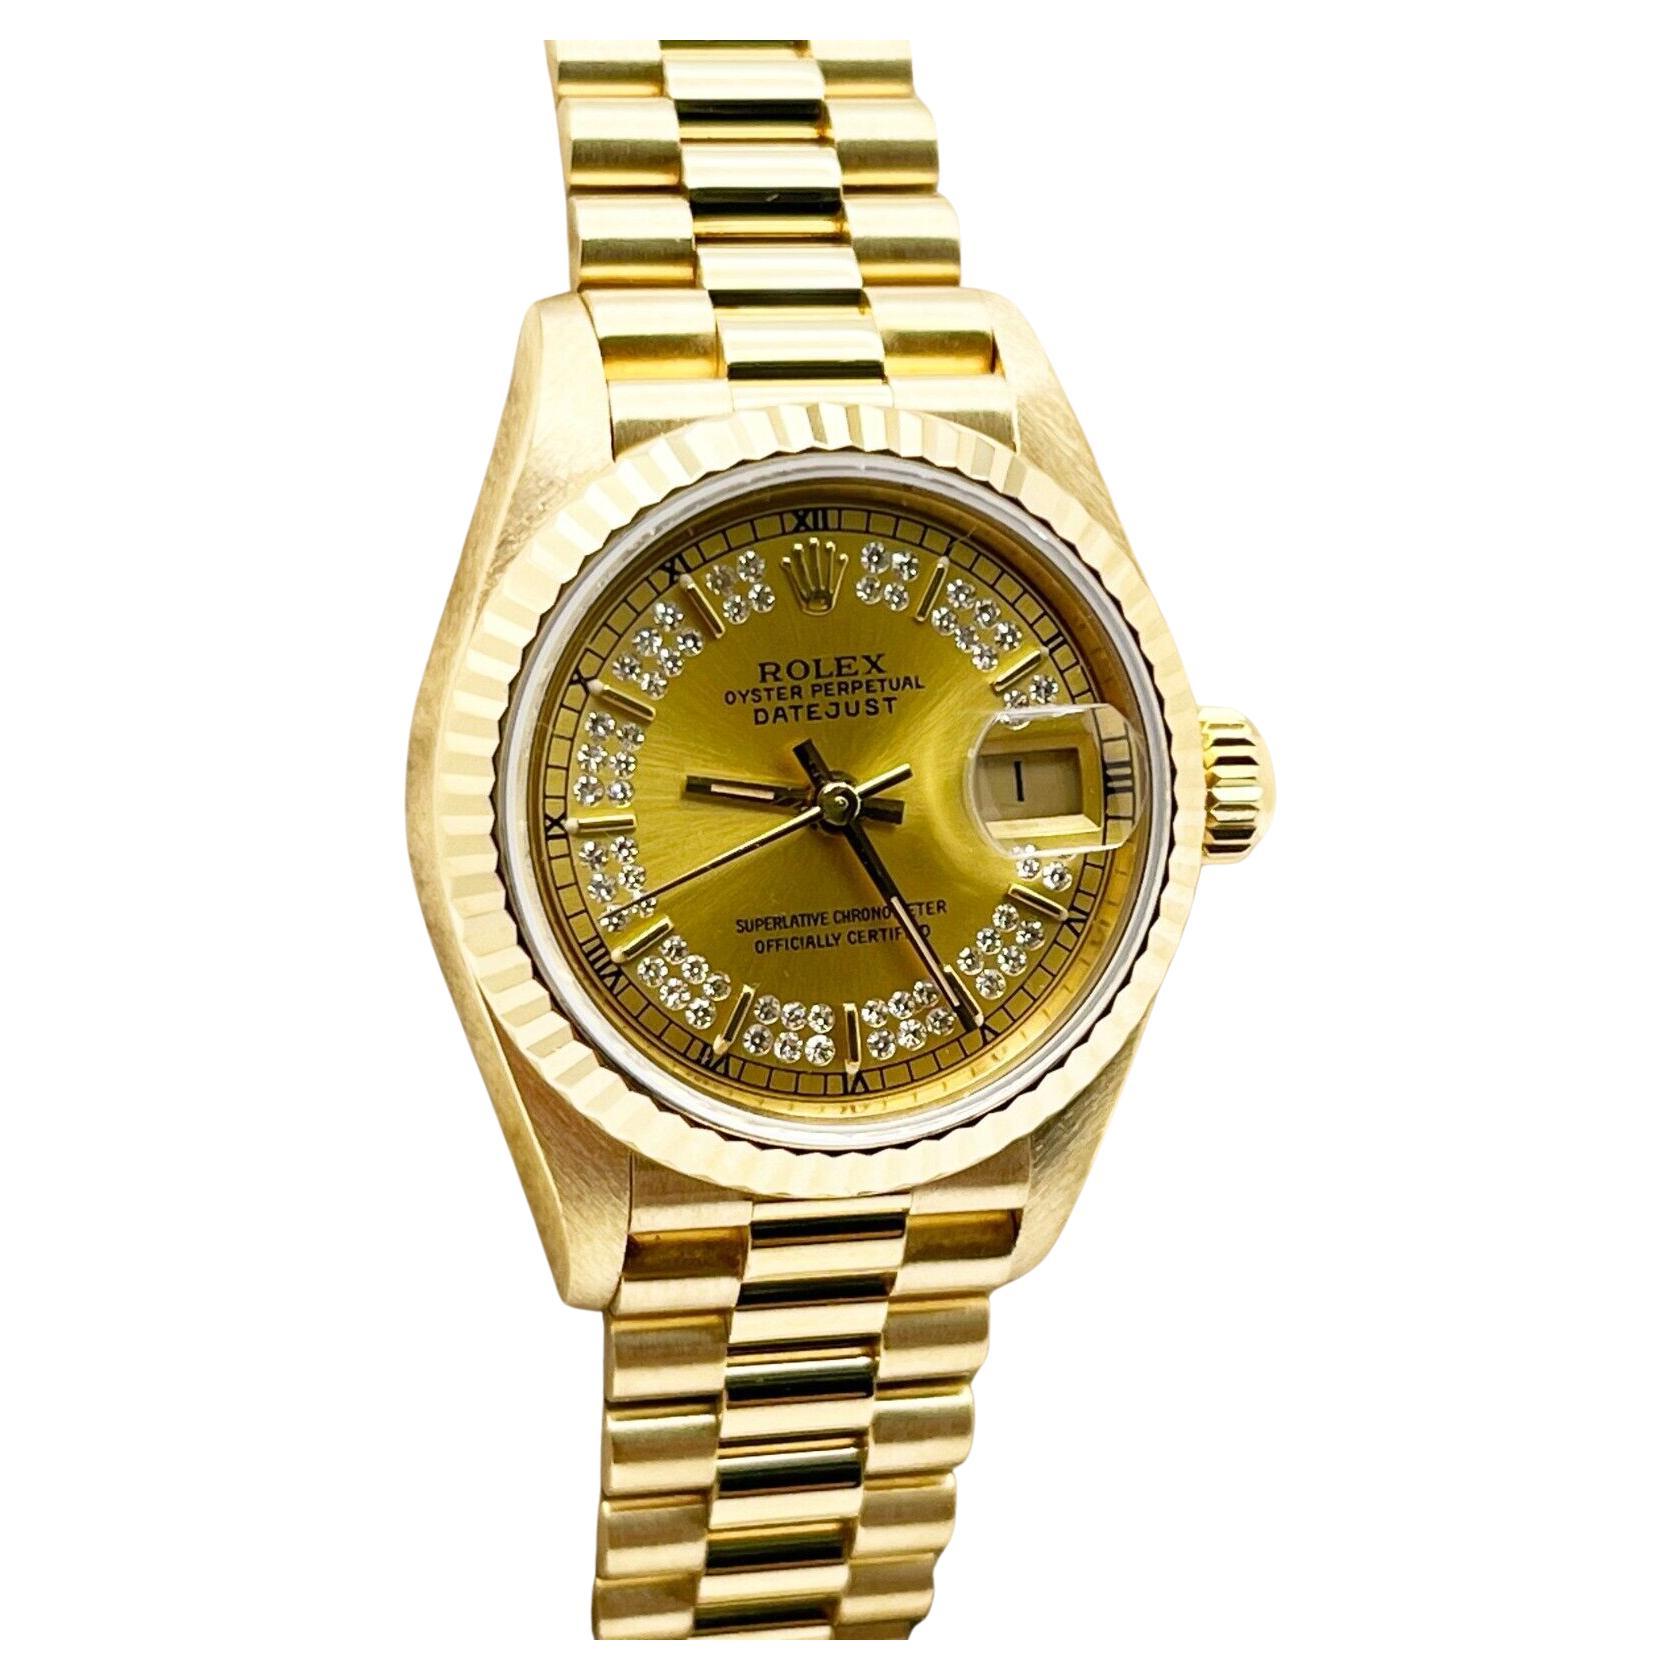 How much gold is in a ladies Rolex?